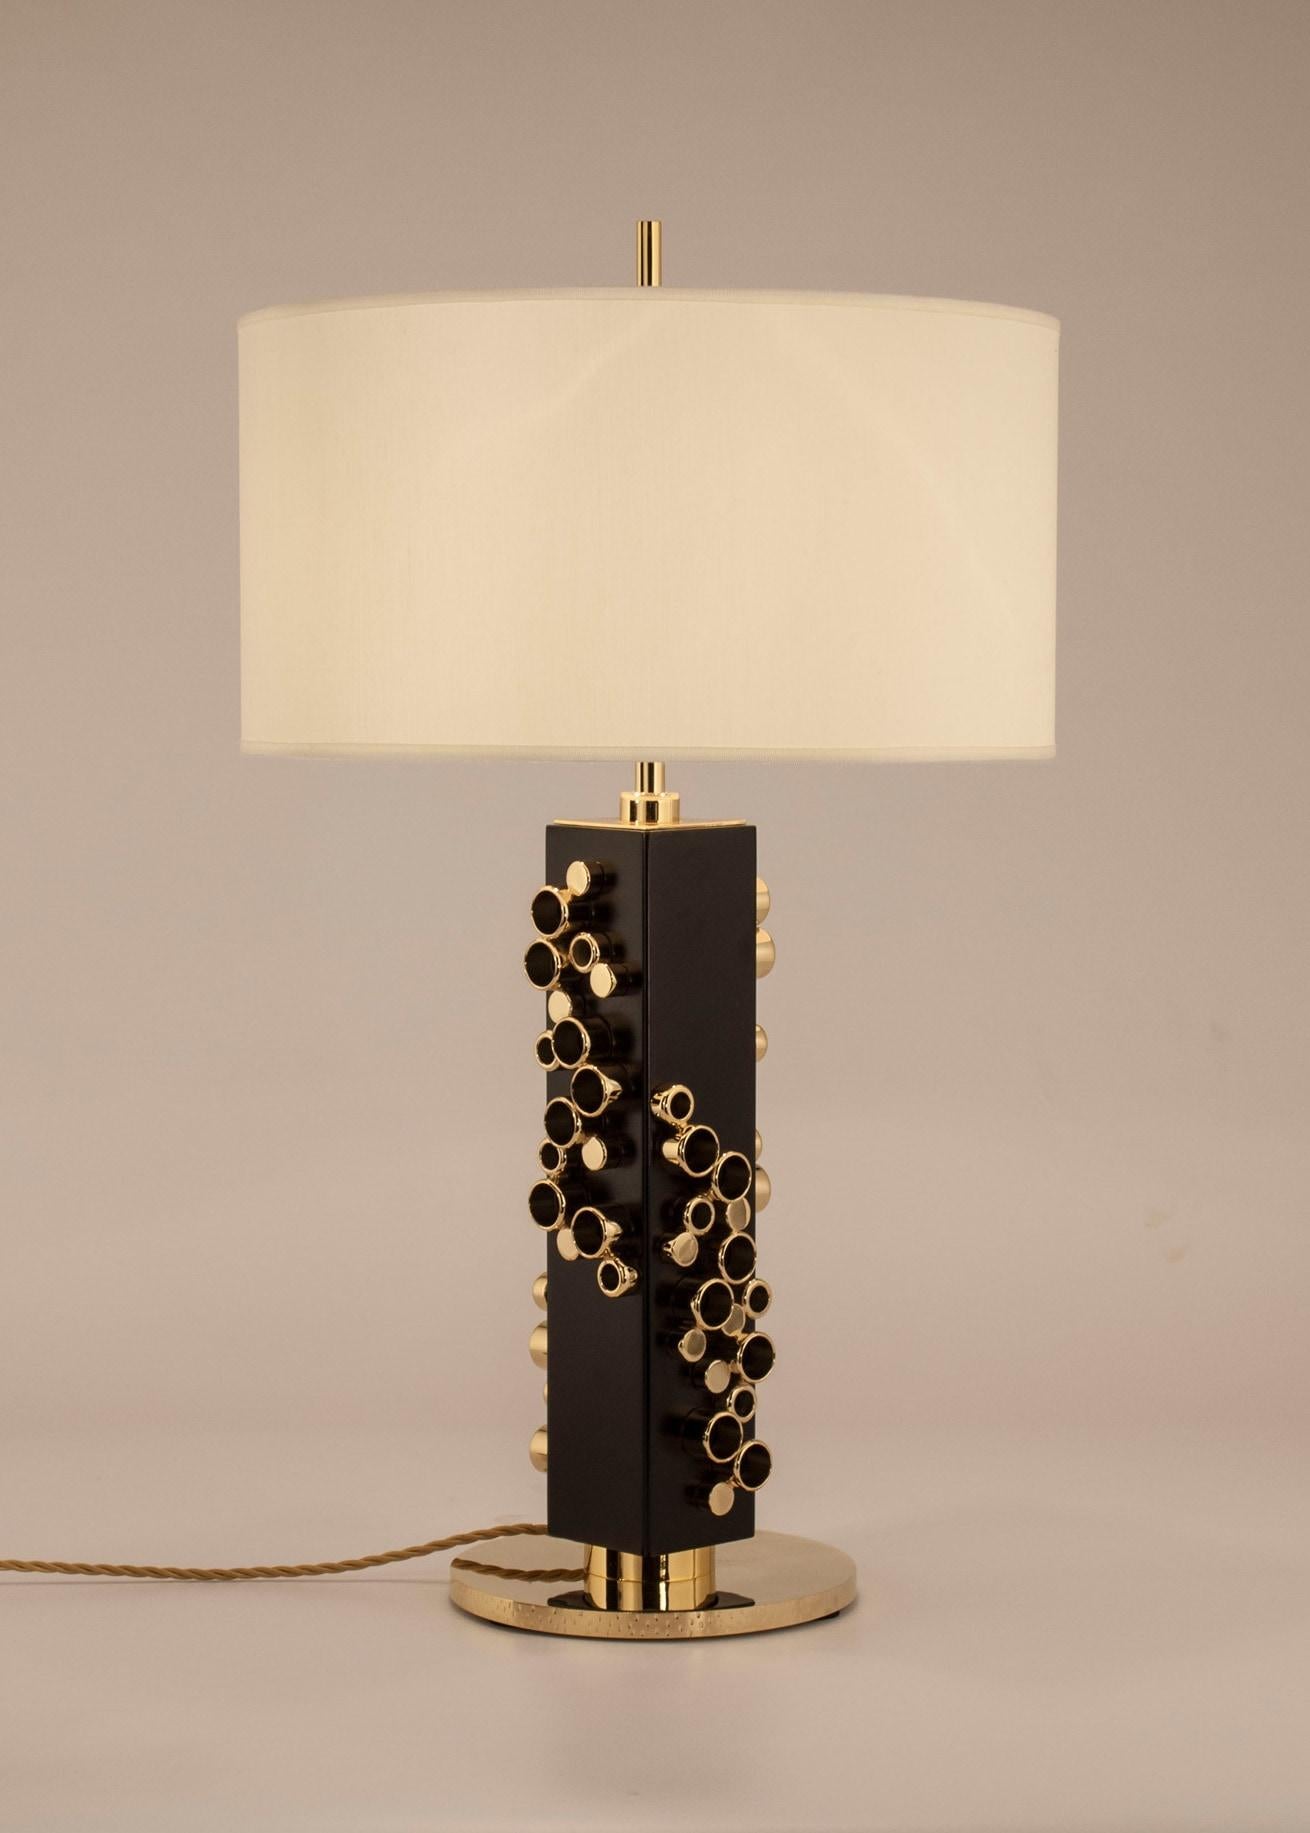 Lamp with decorated cast brass base, black lacquered wooden frame decorated with precious cylindrical brass details with gold bath. Circular lampshade in ivory colored shantung.